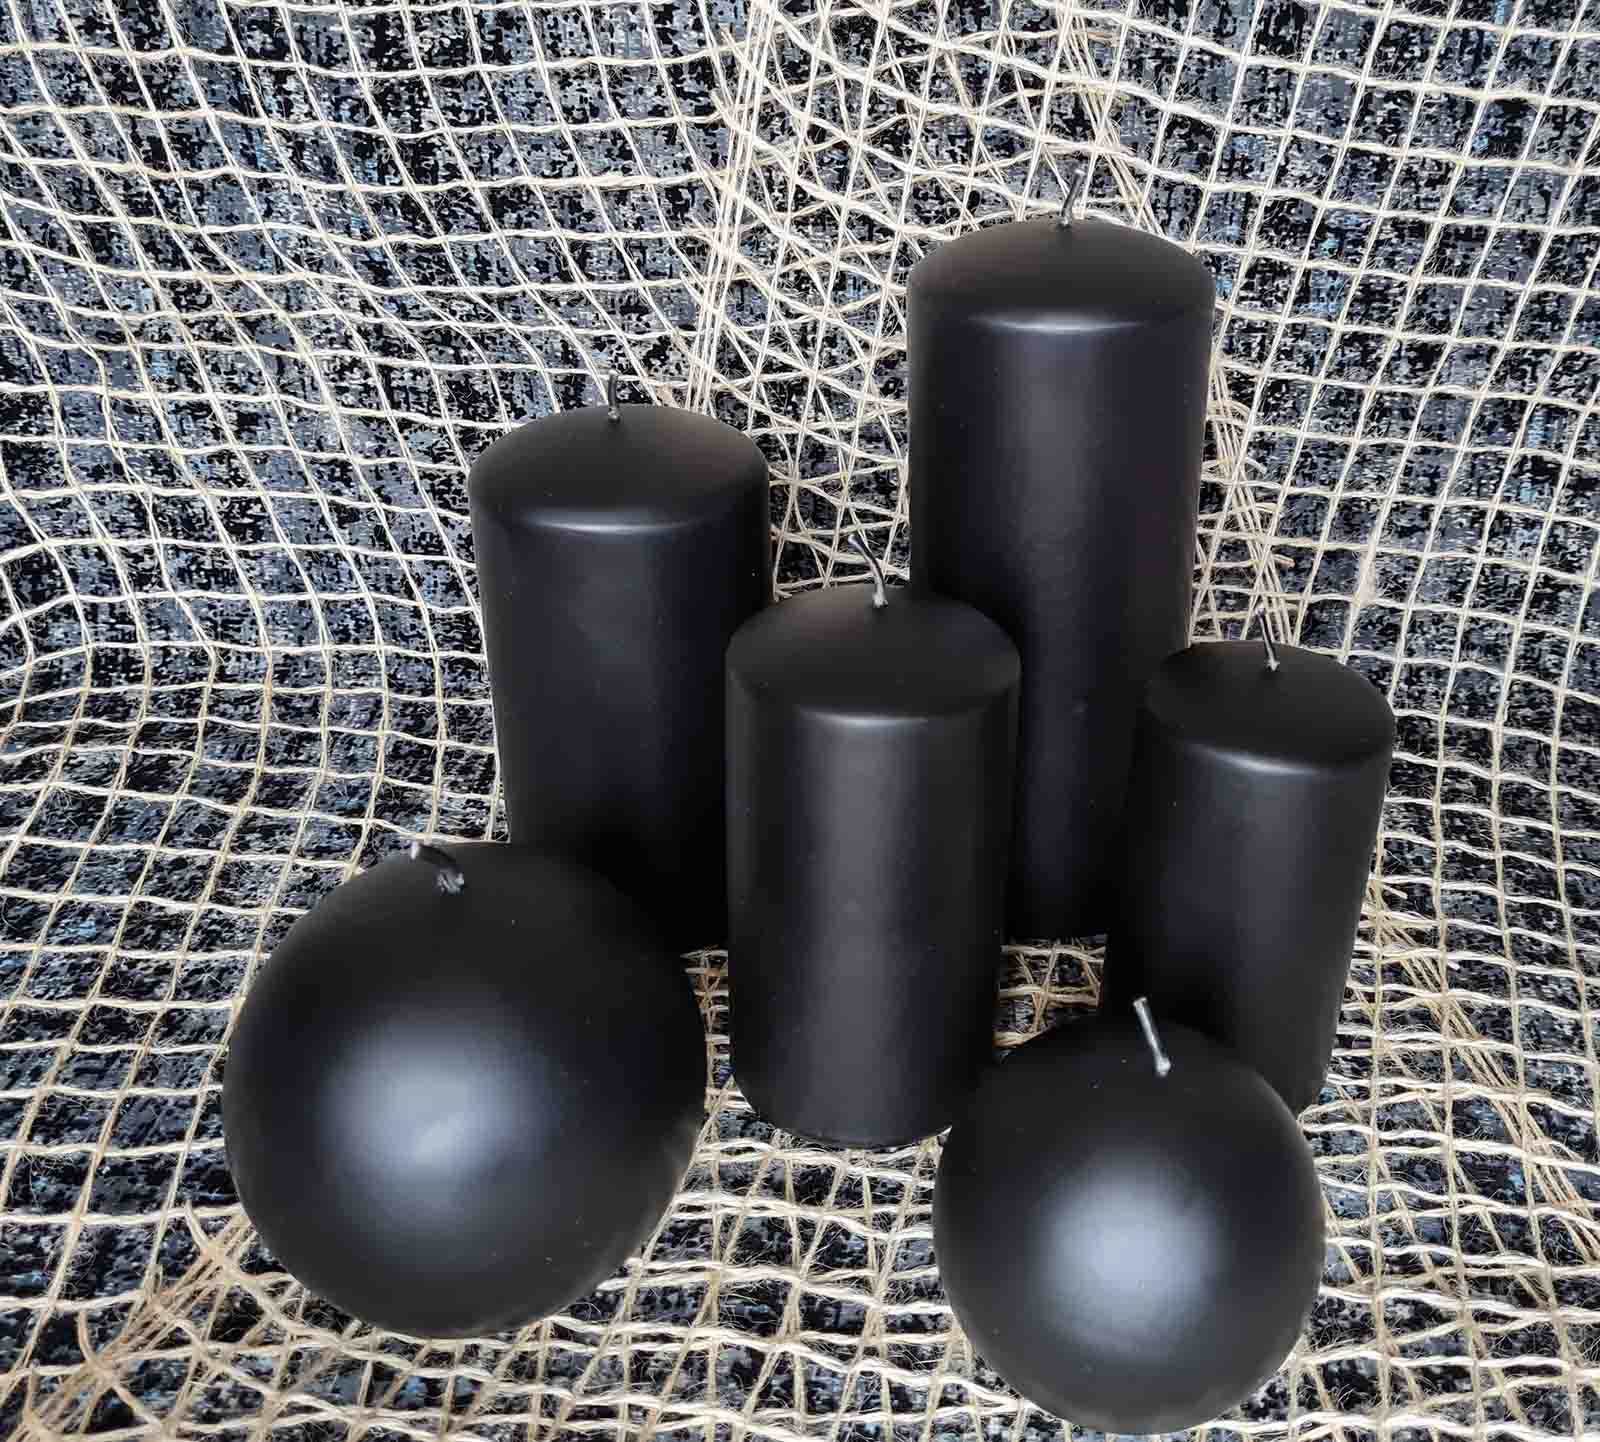 Four pillar and two round black mat candles surrounded by the decorative net on the black background